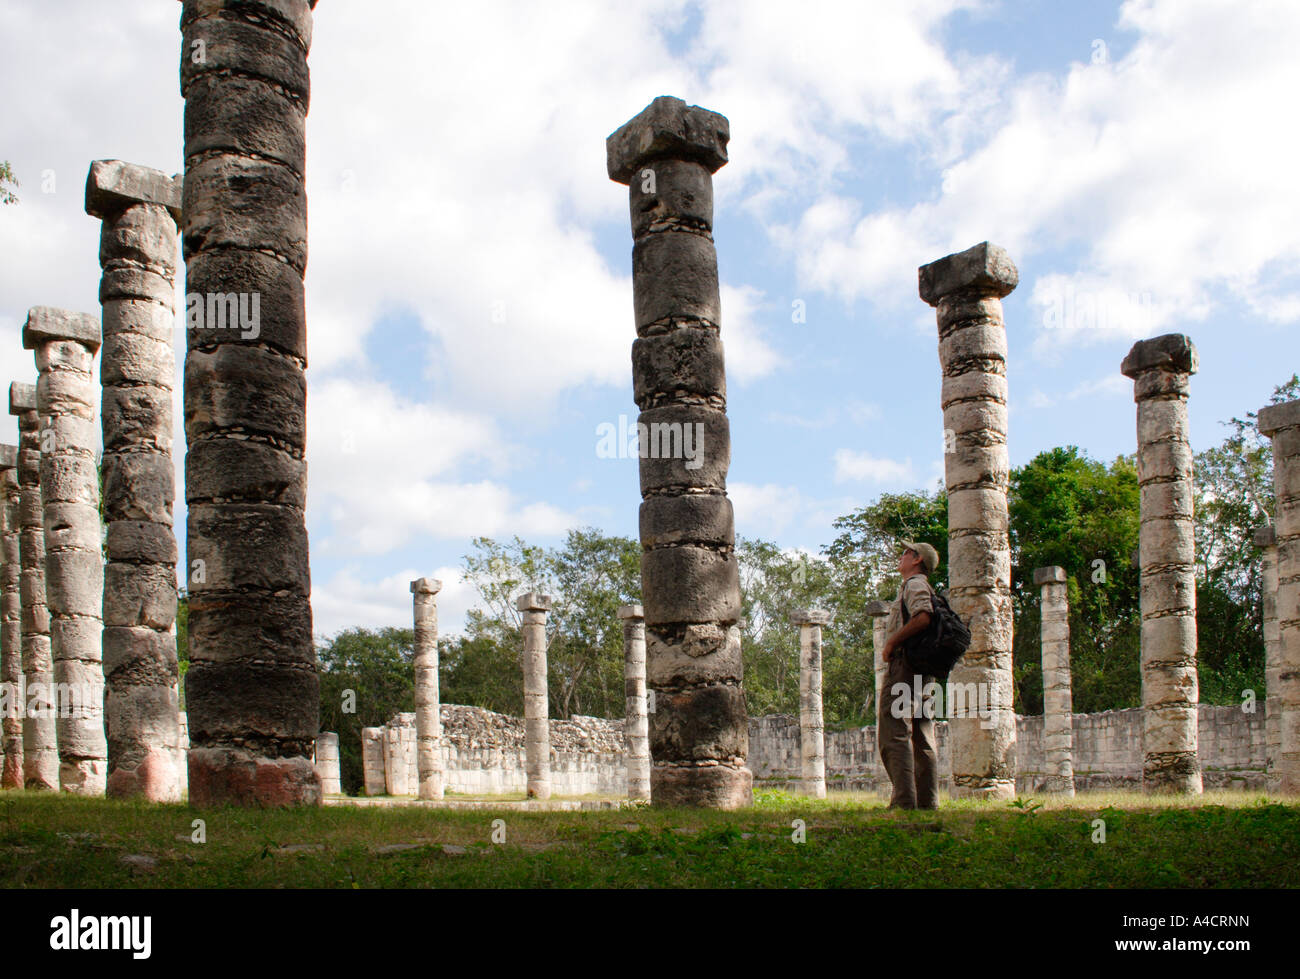 Chichen Itza, Mayan Archaeological ruin site in North Central Yucatan shows Toltec influence from Central Mexico Stock Photo